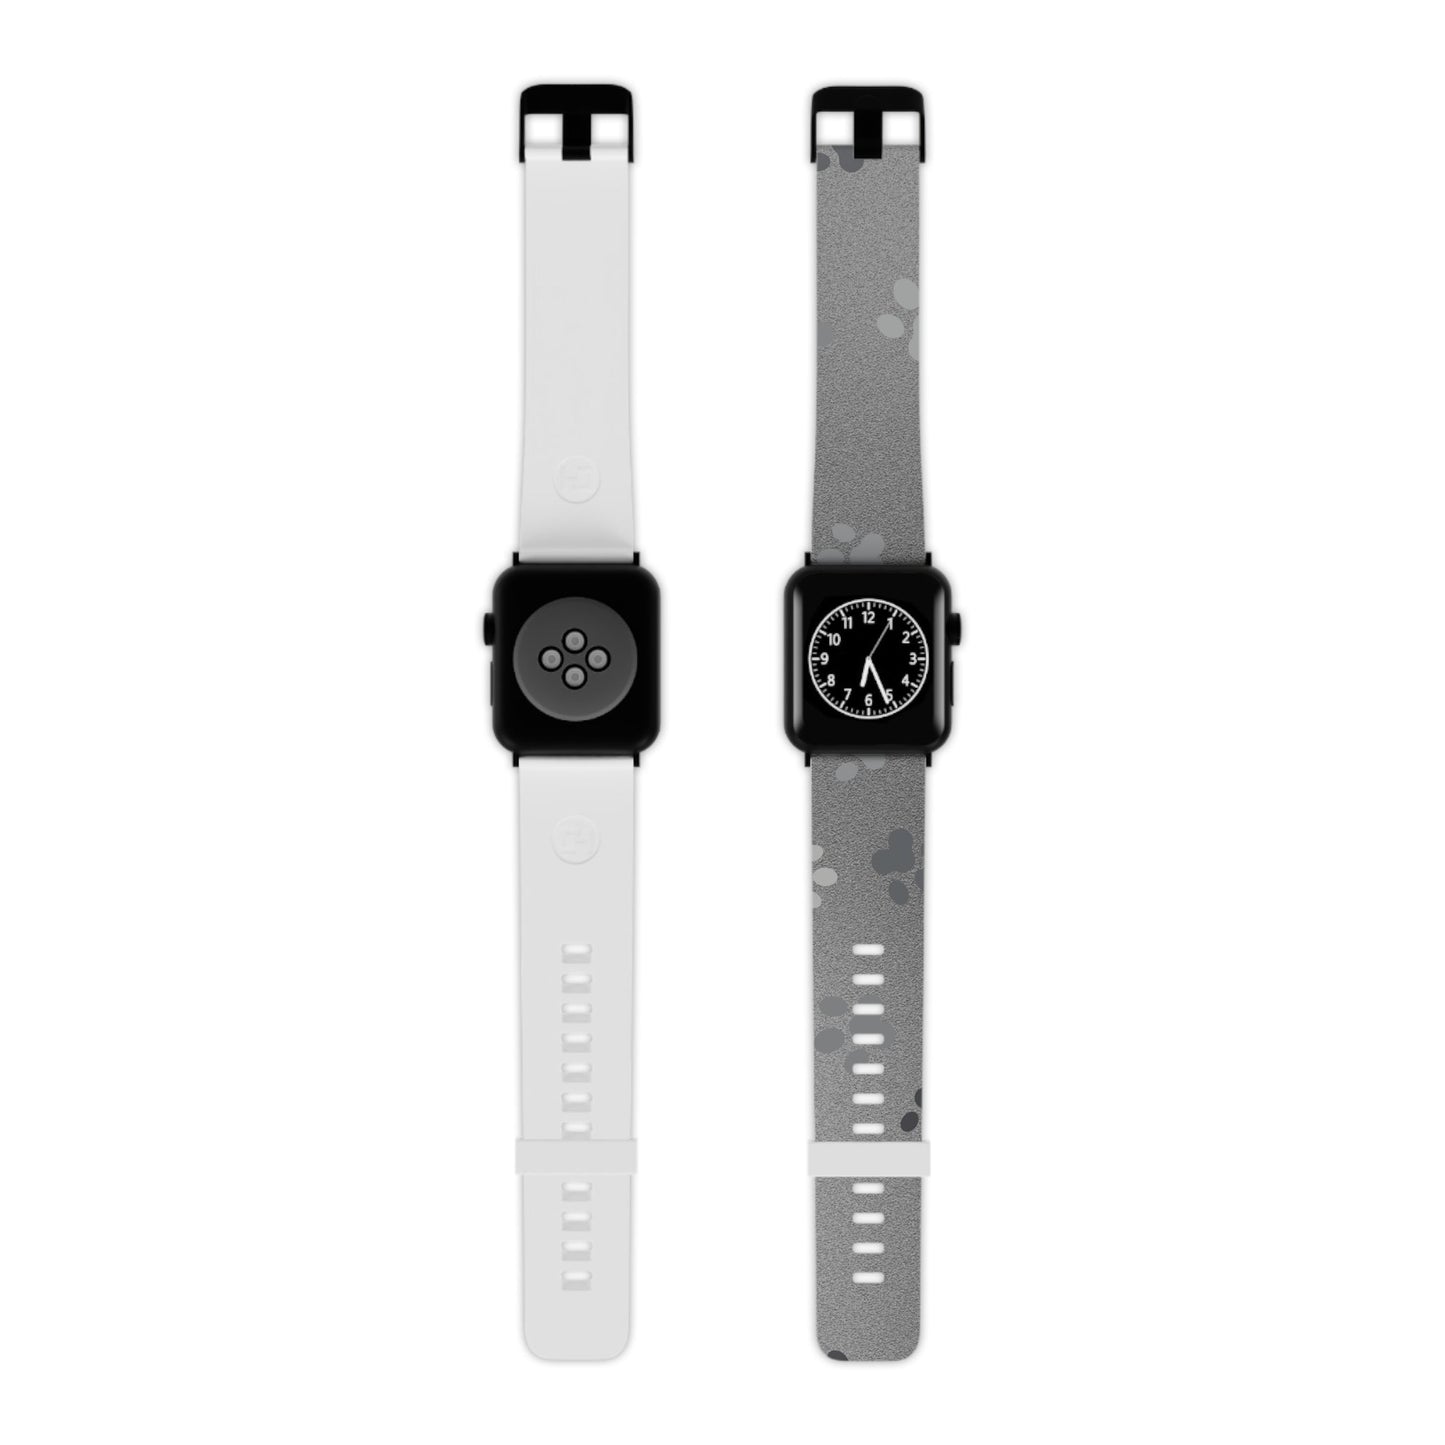 Paws in Silver Watch Band for Apple Watch - Accessories - Epileptic Al’s Shop